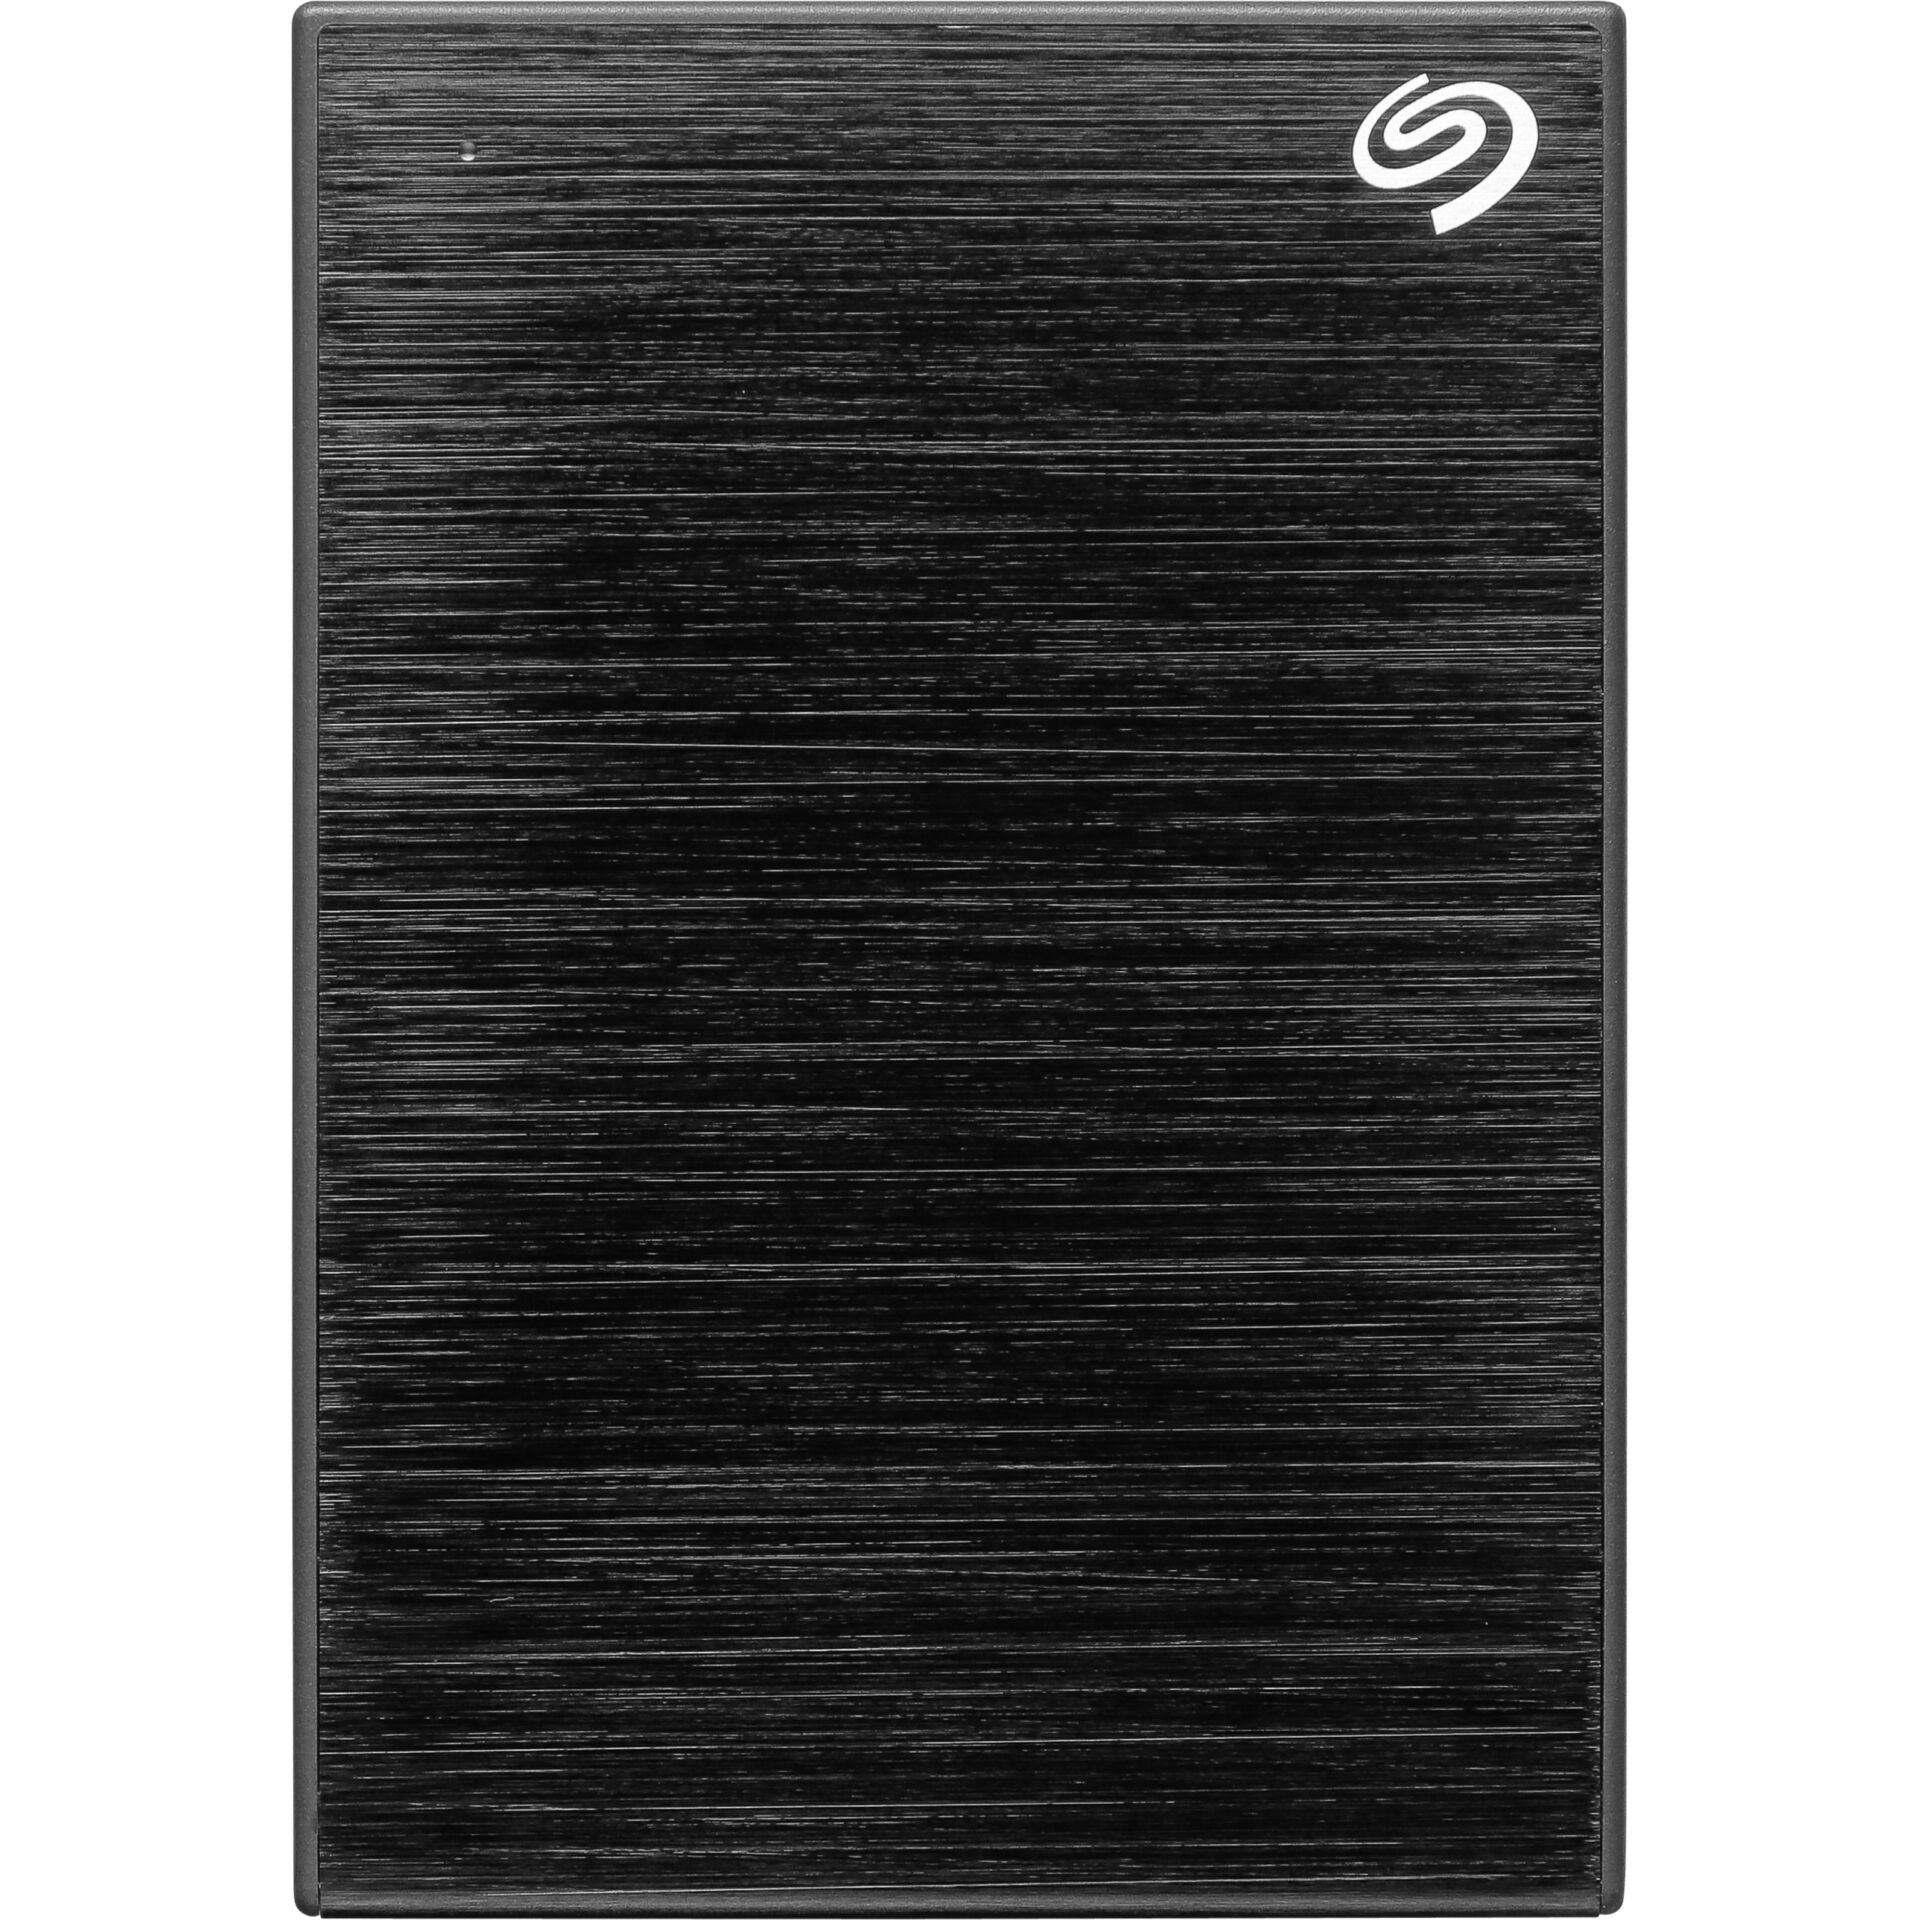 Seagate -Externe Festplatte OneTouch Portable 4 TB -Seagate  Hardware/Electronic